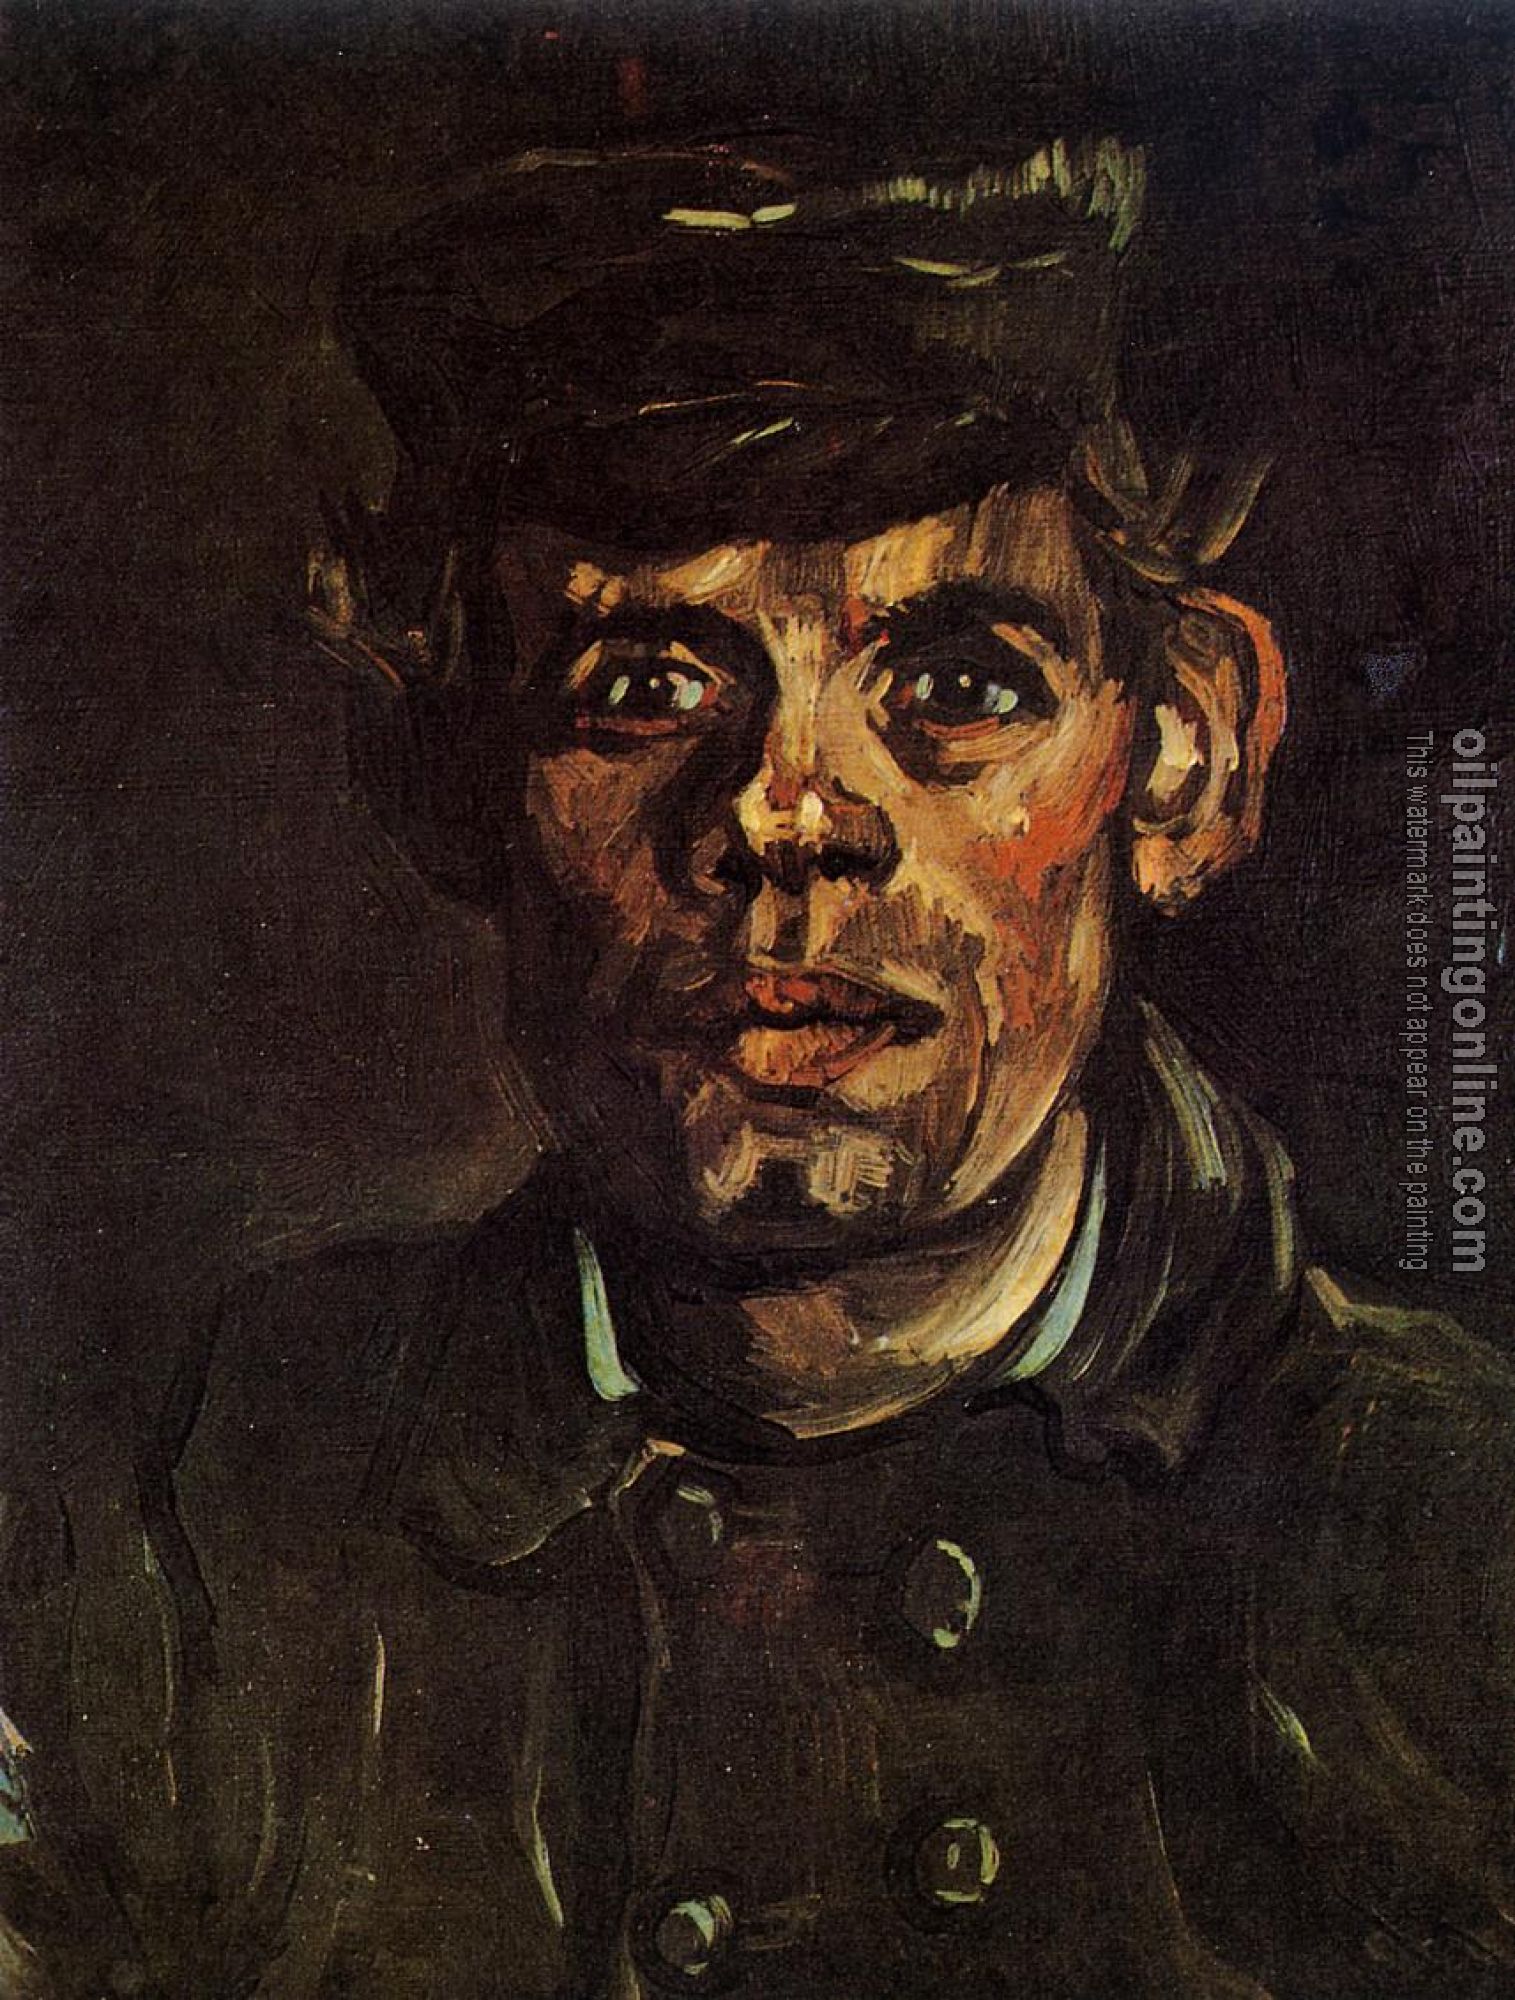 Gogh, Vincent van - Head of a Young Peasant in a Peaked Cap